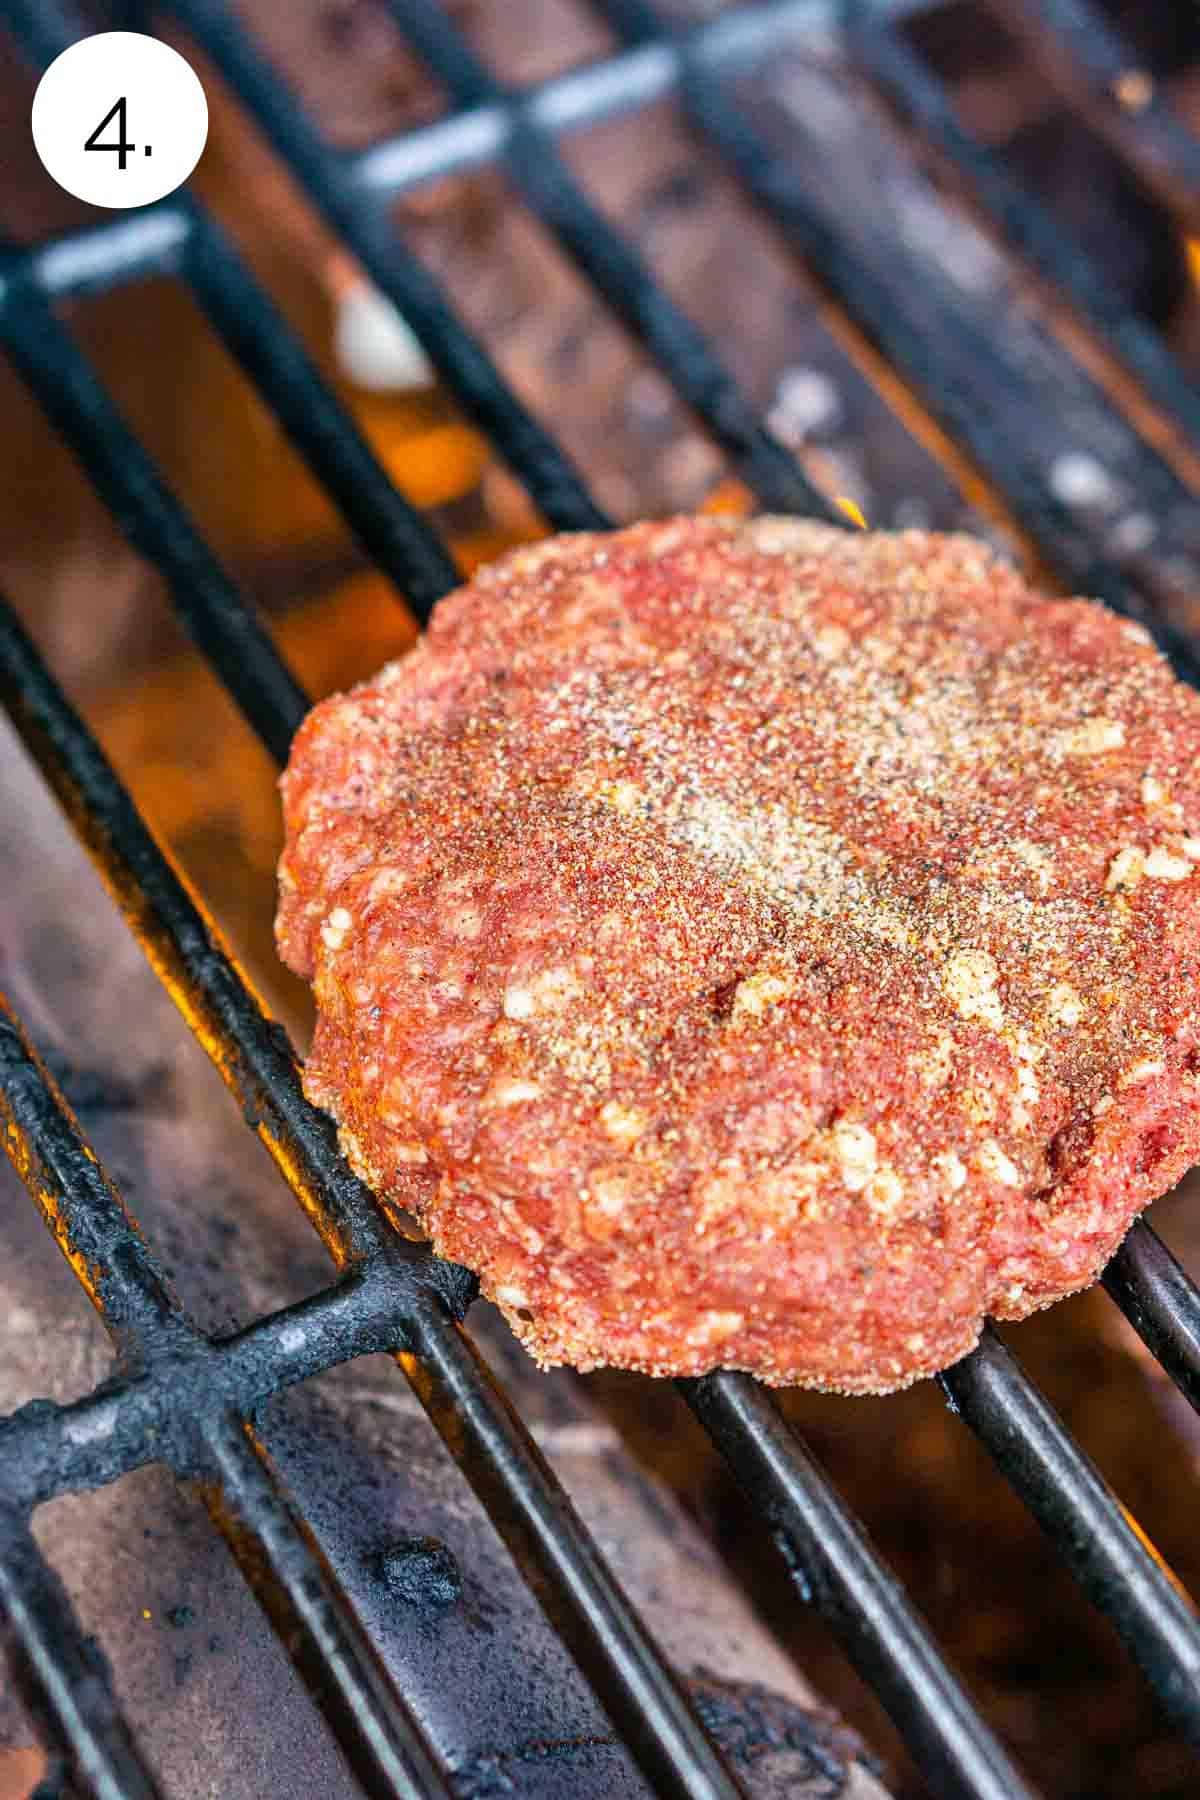 Two burger patties on a grill before closing the lid to cook on one side.